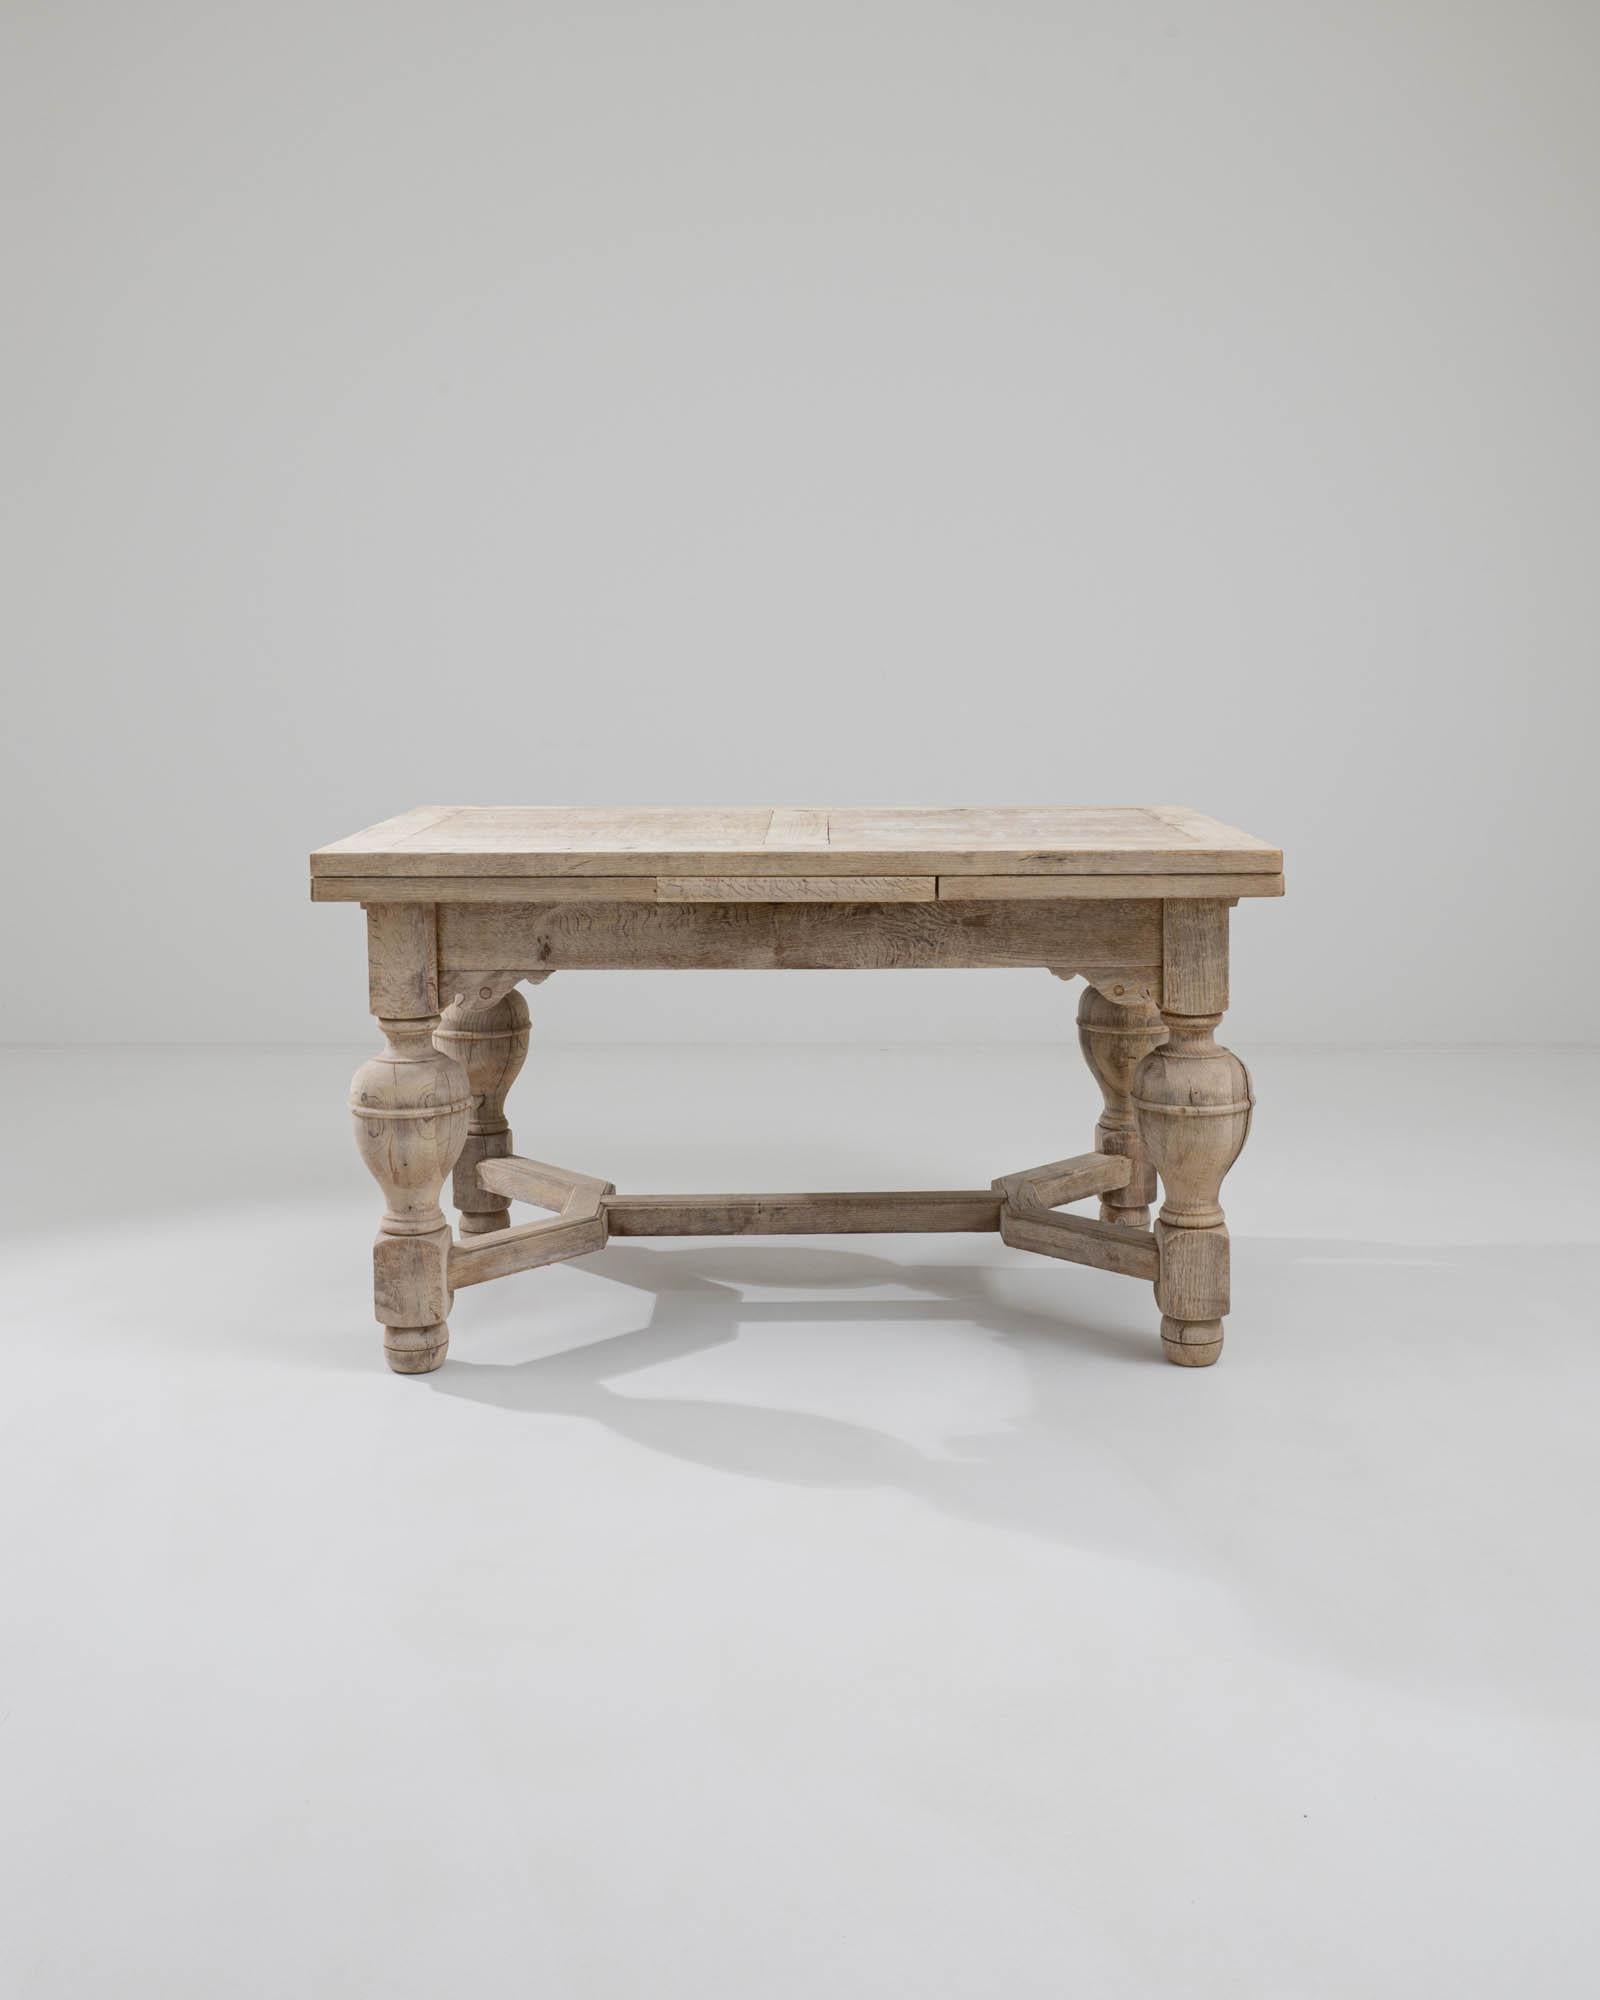 A wooden dining table made in Belgium circa 1900. Four strong and sturdy legs, lathed into sumptuous curves buttress this bold table with classical good looks. With two extra leaves, expanding the expansive surface area of this regal dining area,